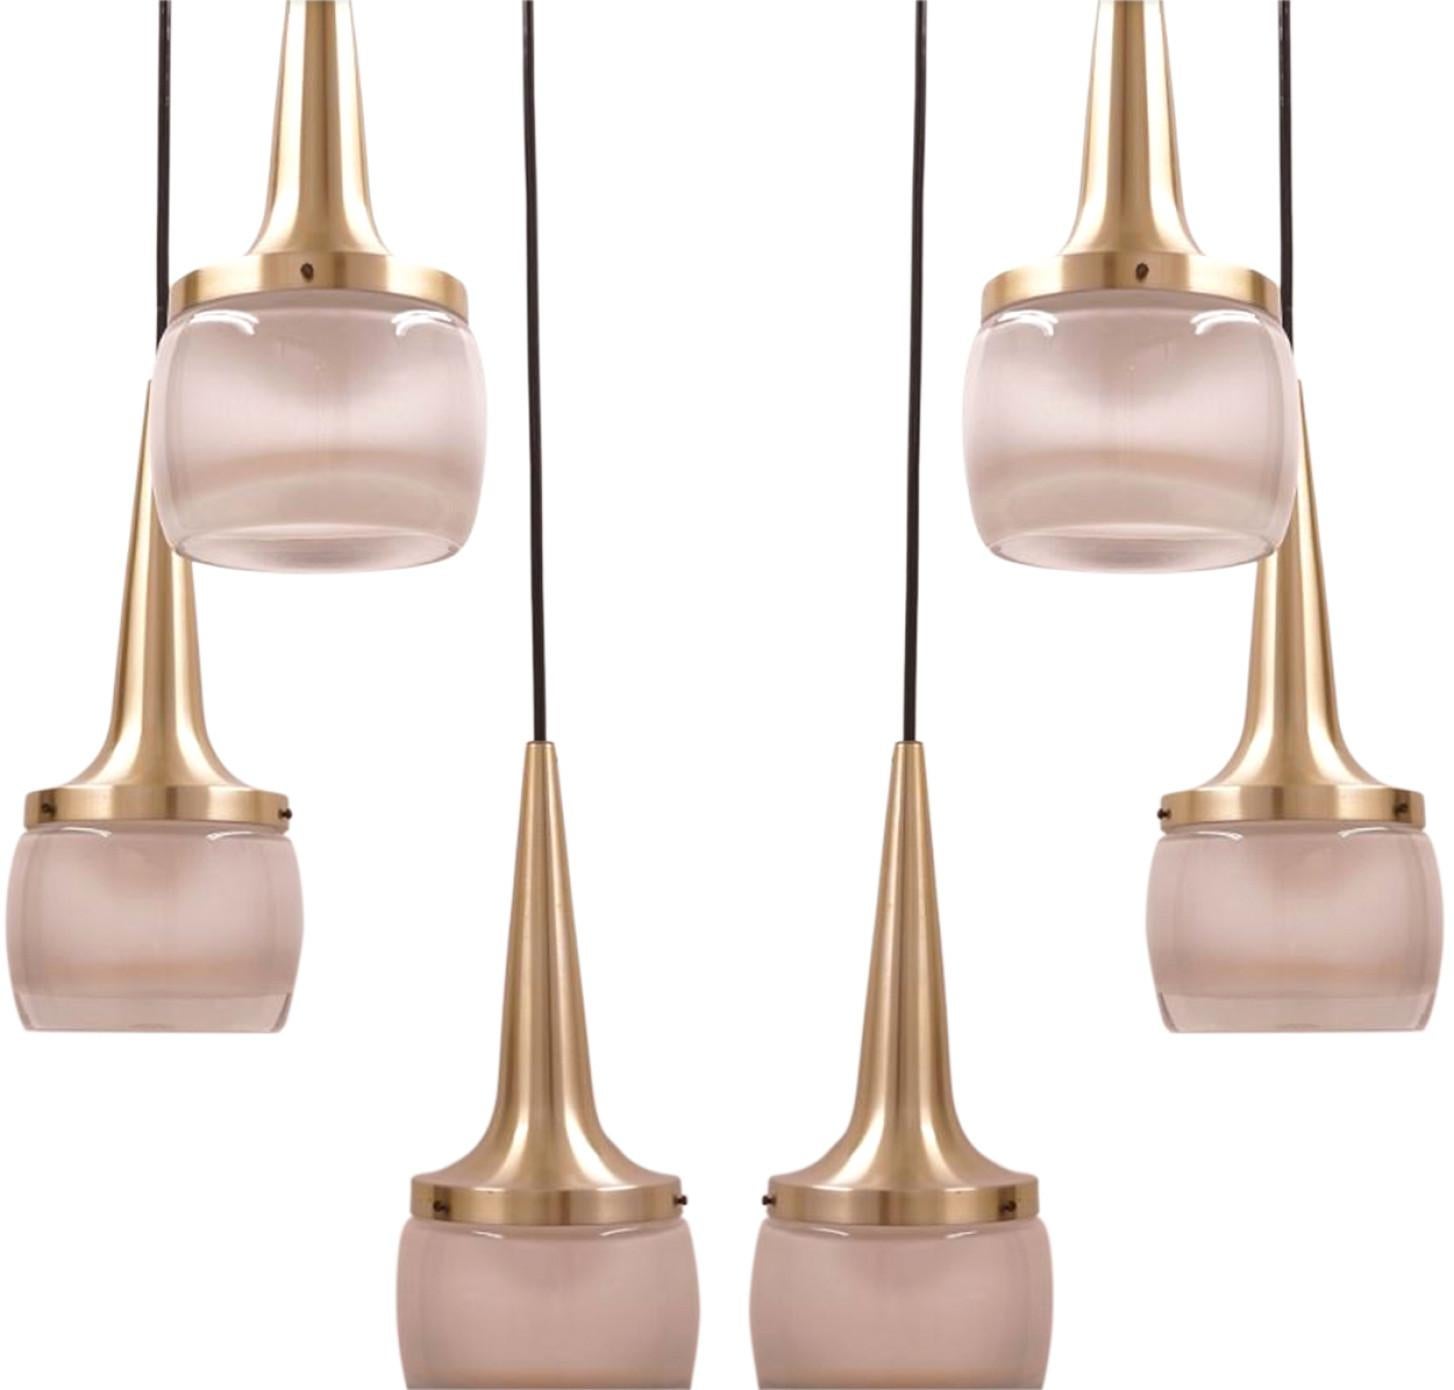 This pair of elegant cascade light fixtures was manufactured by Staff Leuchten in Germany. The light is executed in brassed aluminium and thick off white opaline molded glass etched on the inside.

Each individual pendant measures: 13.5 in. H x 5.25